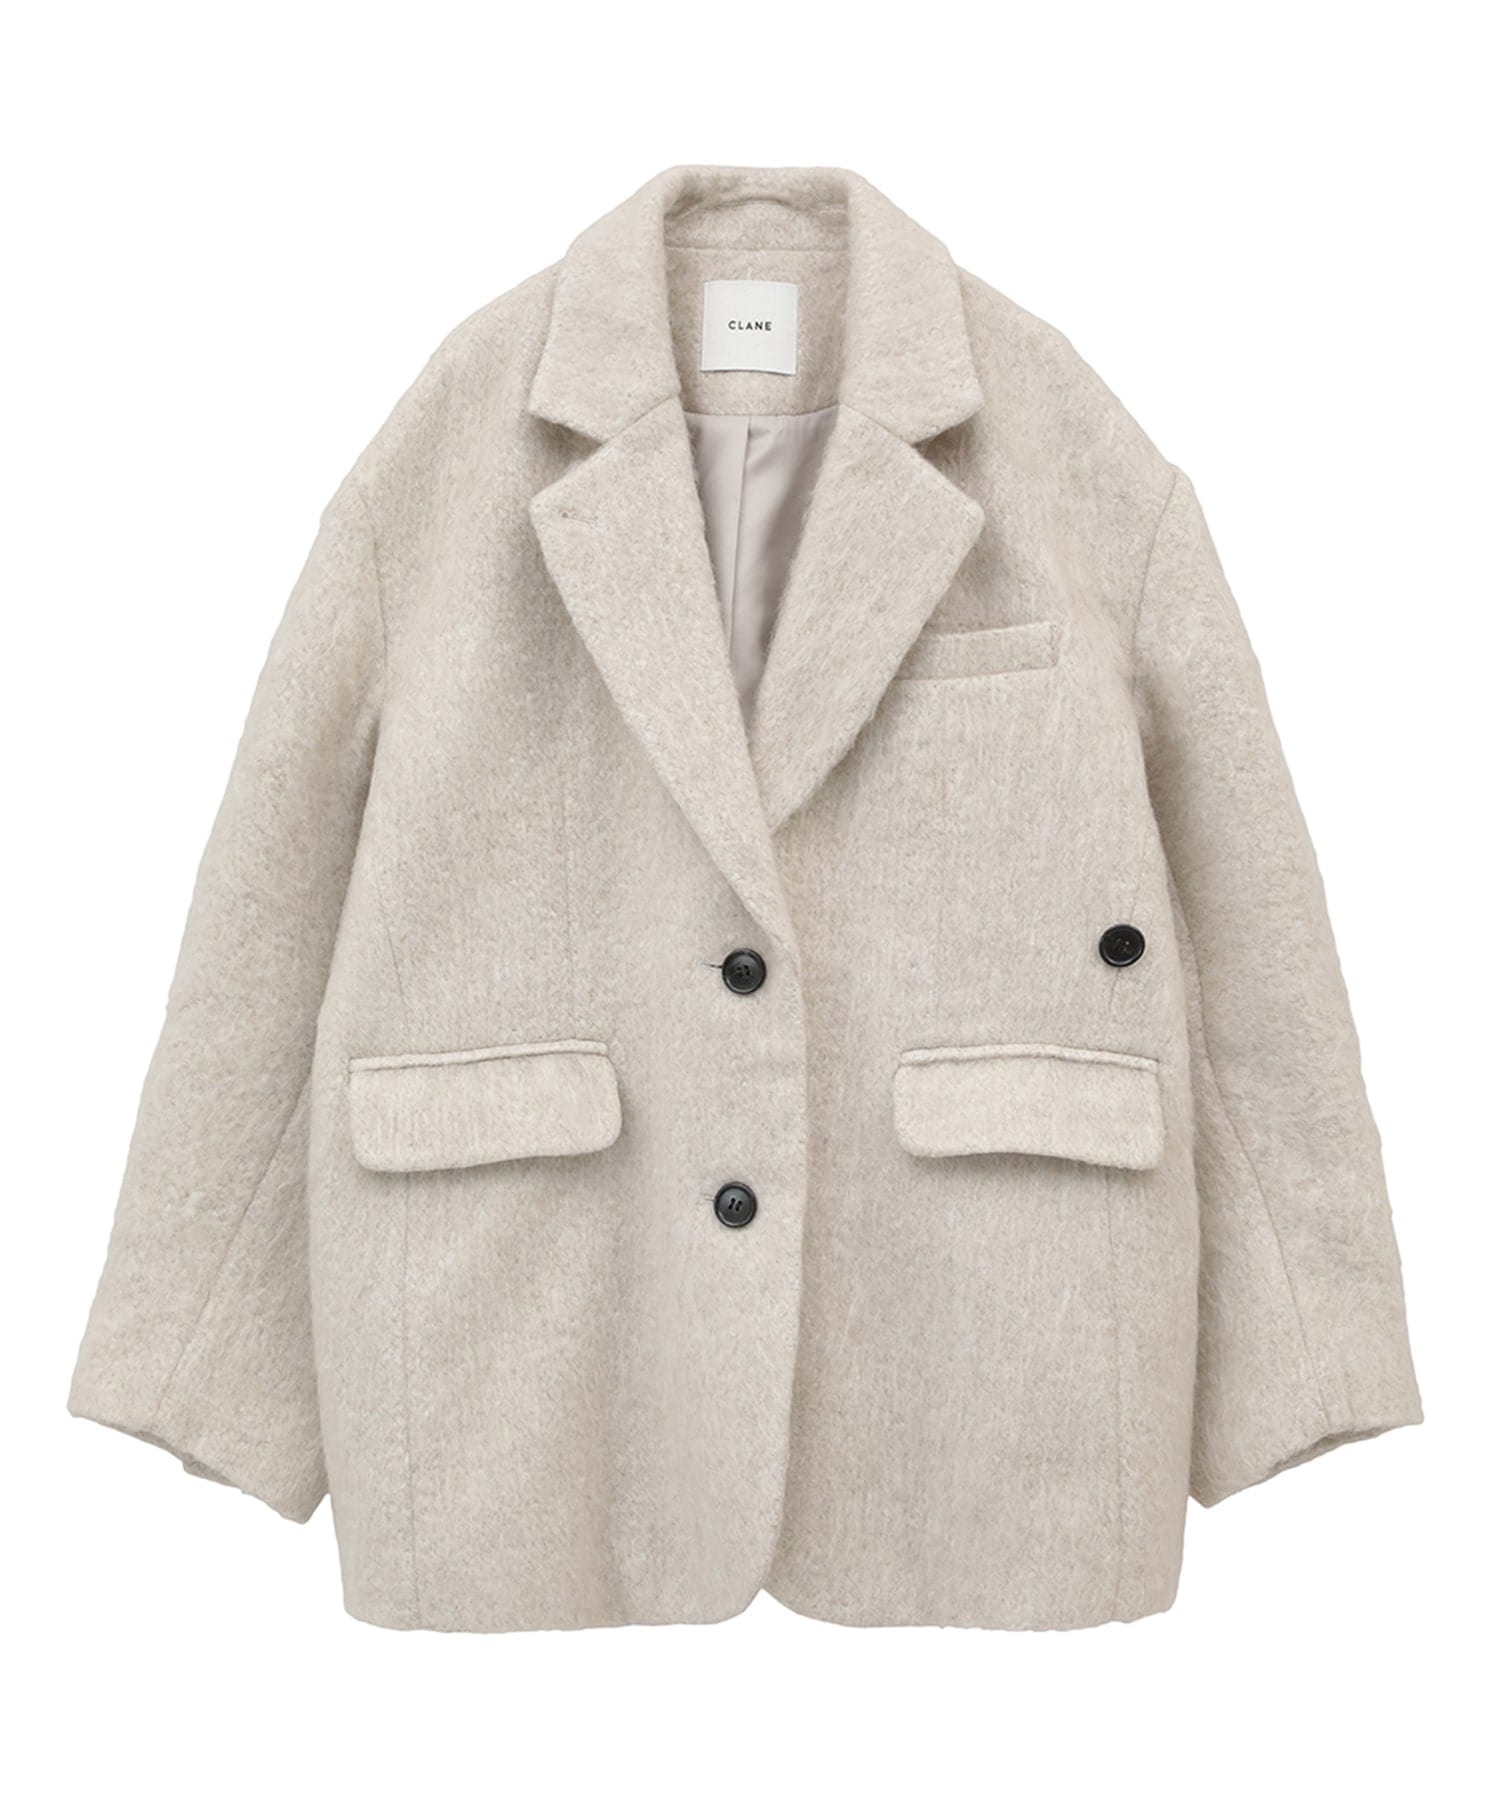 MIX SHAGGY OVER TAILORED JACKET(1 IVORY): CLANE: WOMENS｜ STUDIOUS ...